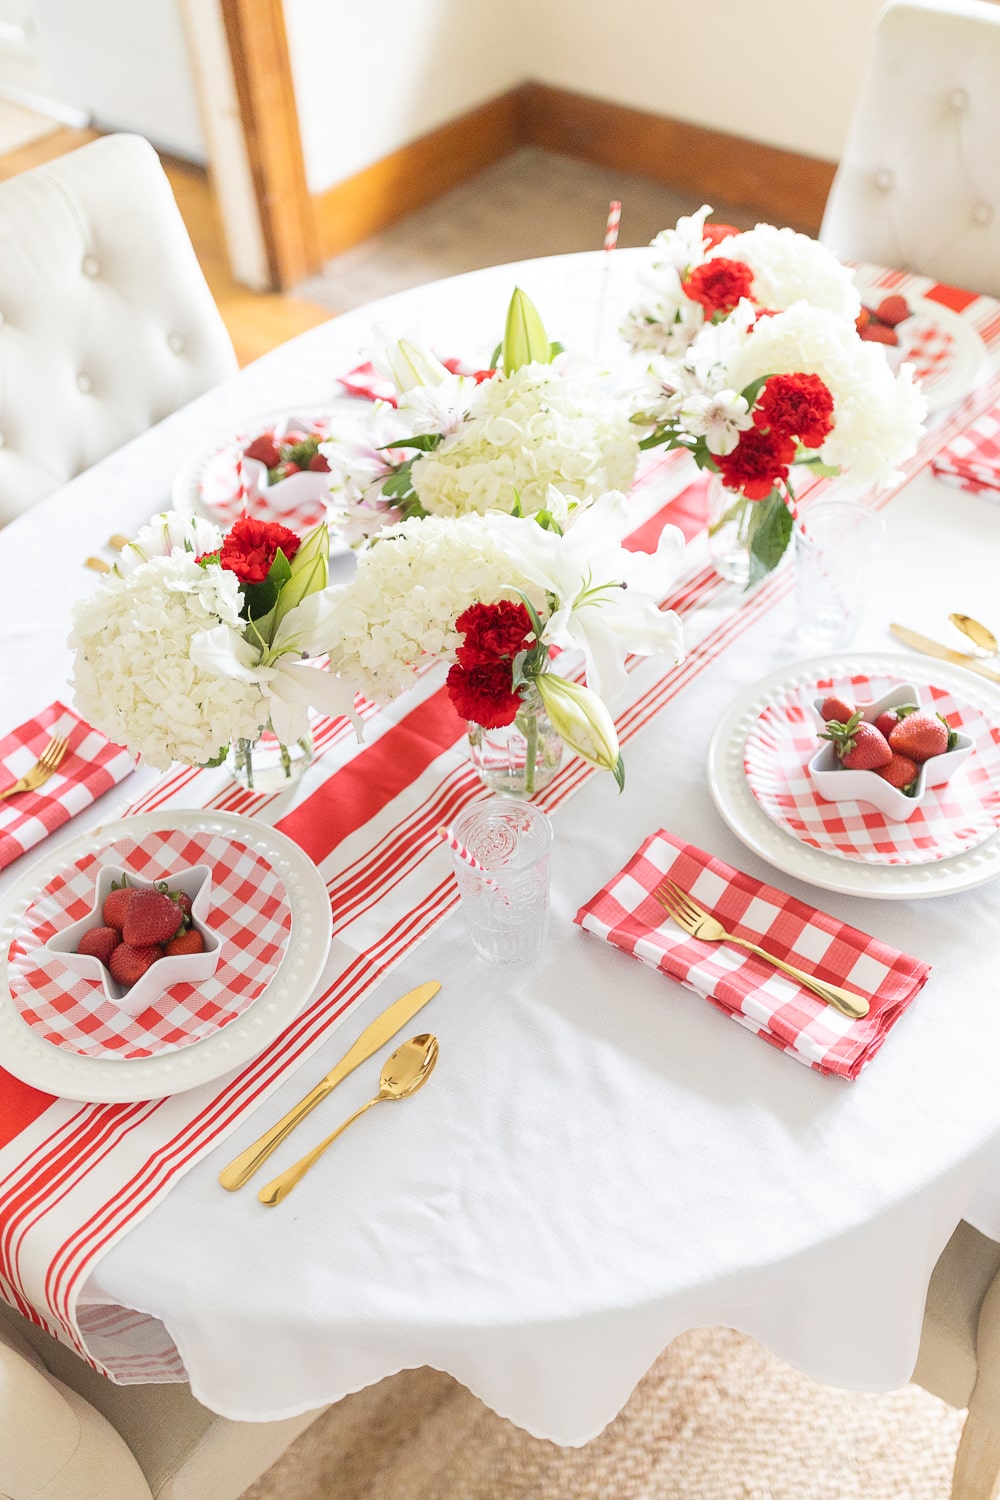 Memorial Day and 4th of July table decor designed by blogger Stephanie Ziajka on Diary of a Debutante